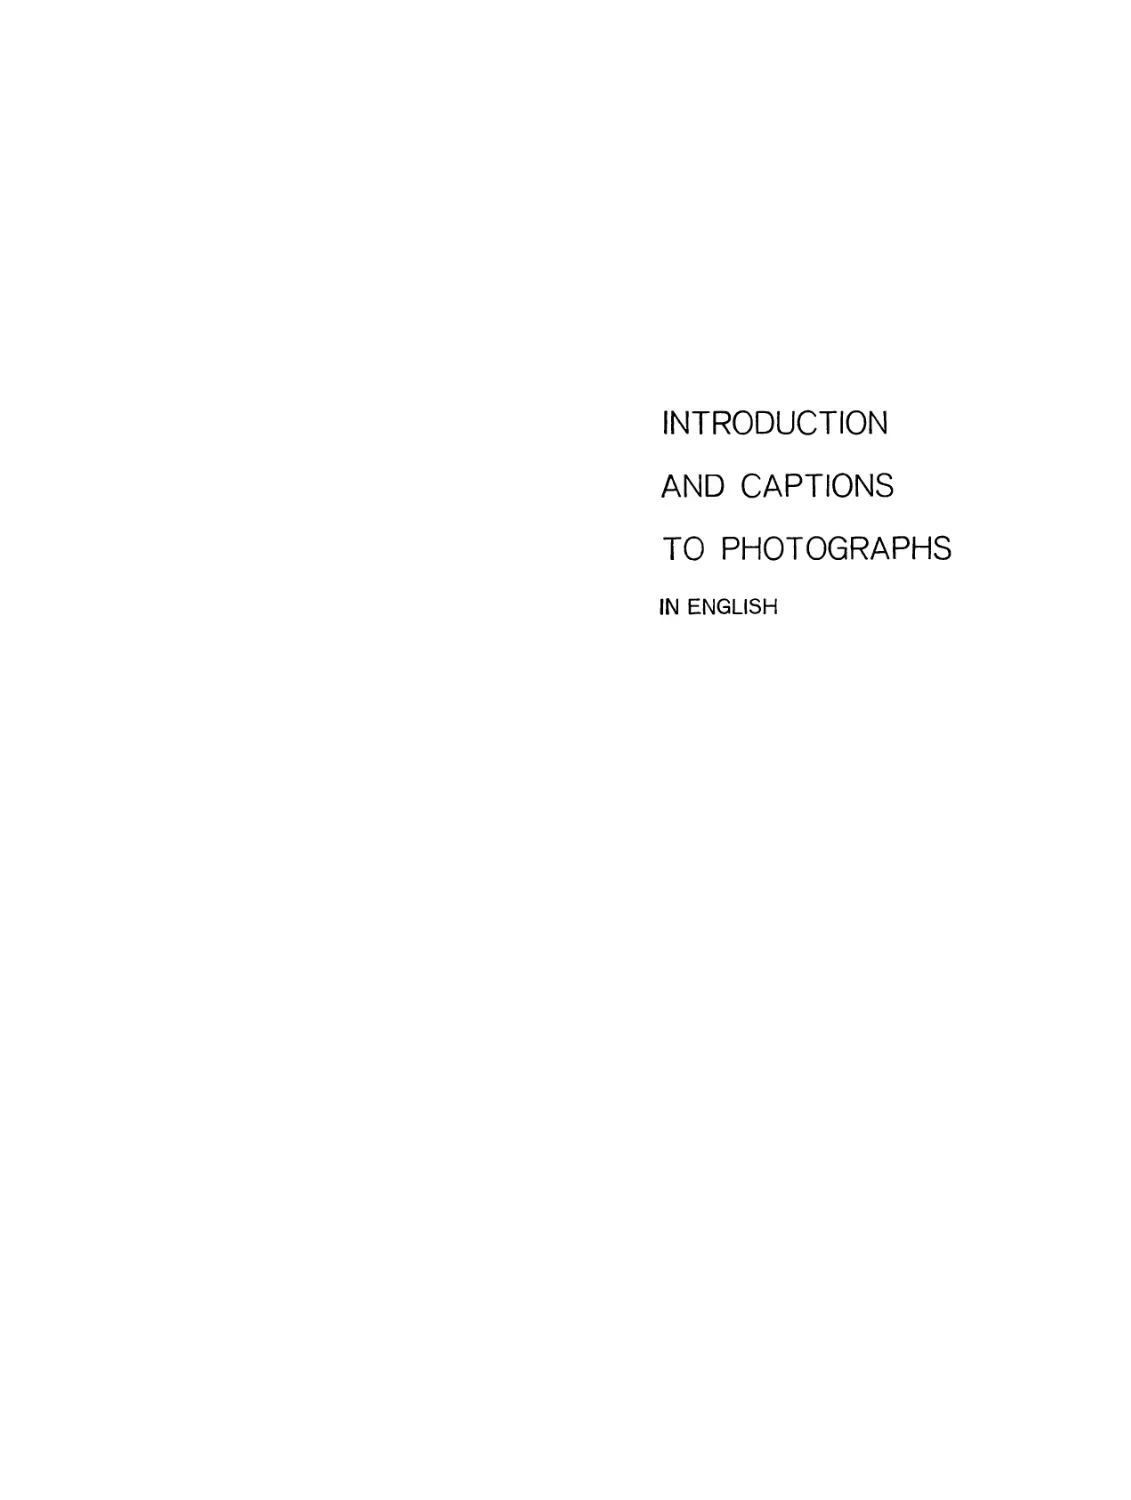 INTRODUCTION  AND  CAPTIONS  ТО  PHOTOGRAPHS  IN  ENGLICH. Translated  by  L.  Chelnokova